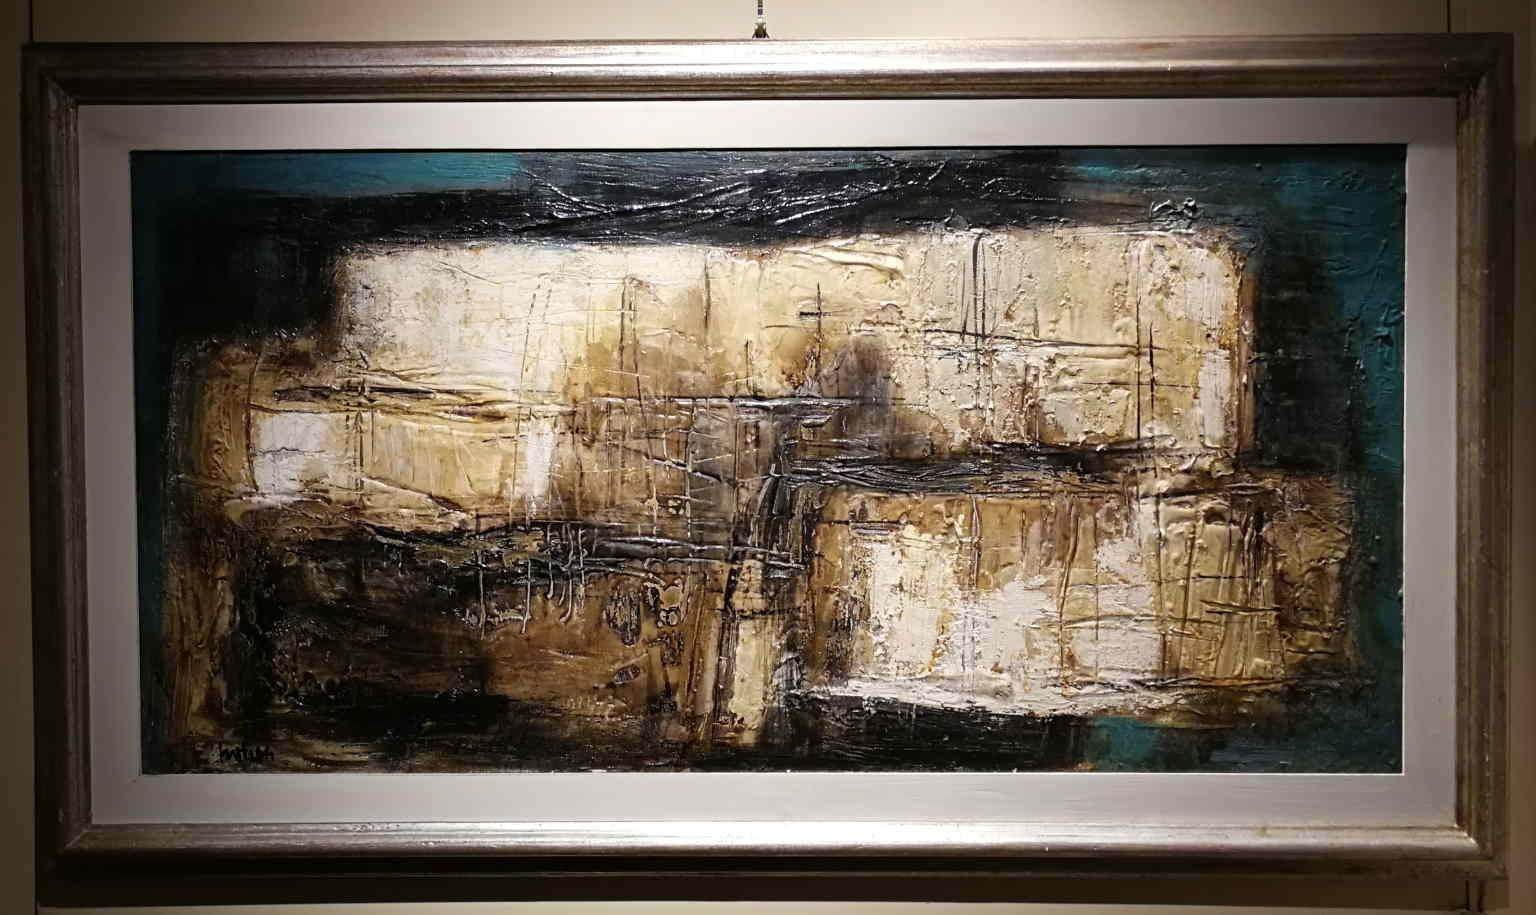 The painting is signed, titled and dated on the back of the canvas: M. Nuti "MARE SILENZIOSO" 1964. 
It's also signed and dated on the front, at the bottom left: Nuti 64

Mario Nuti is a florentine artist that, starting from Neocubism, became one of